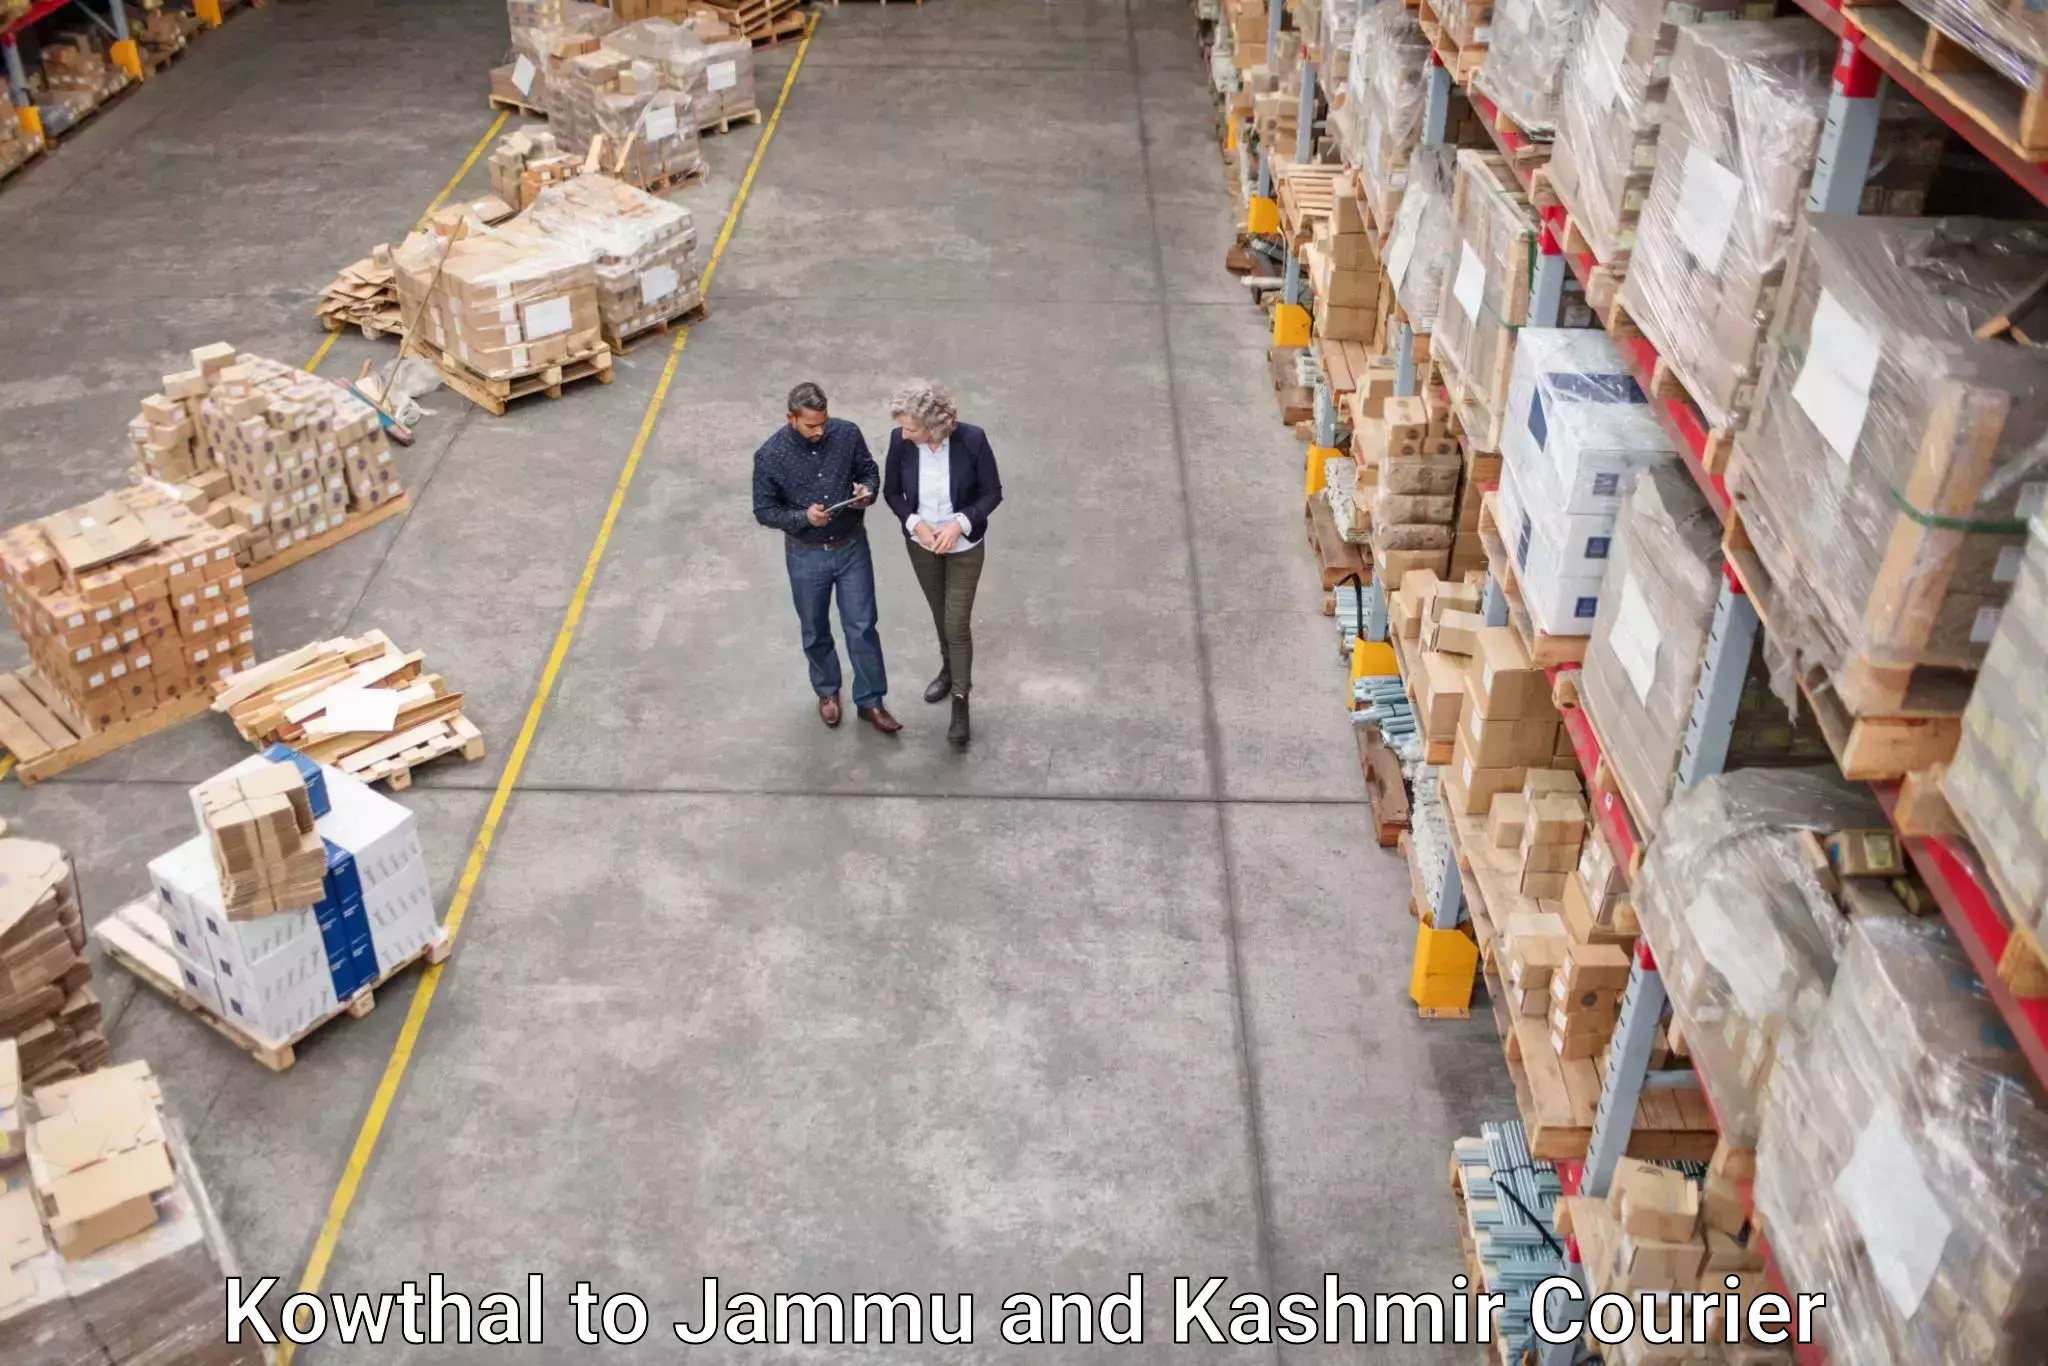 Package delivery network Kowthal to Srinagar Kashmir